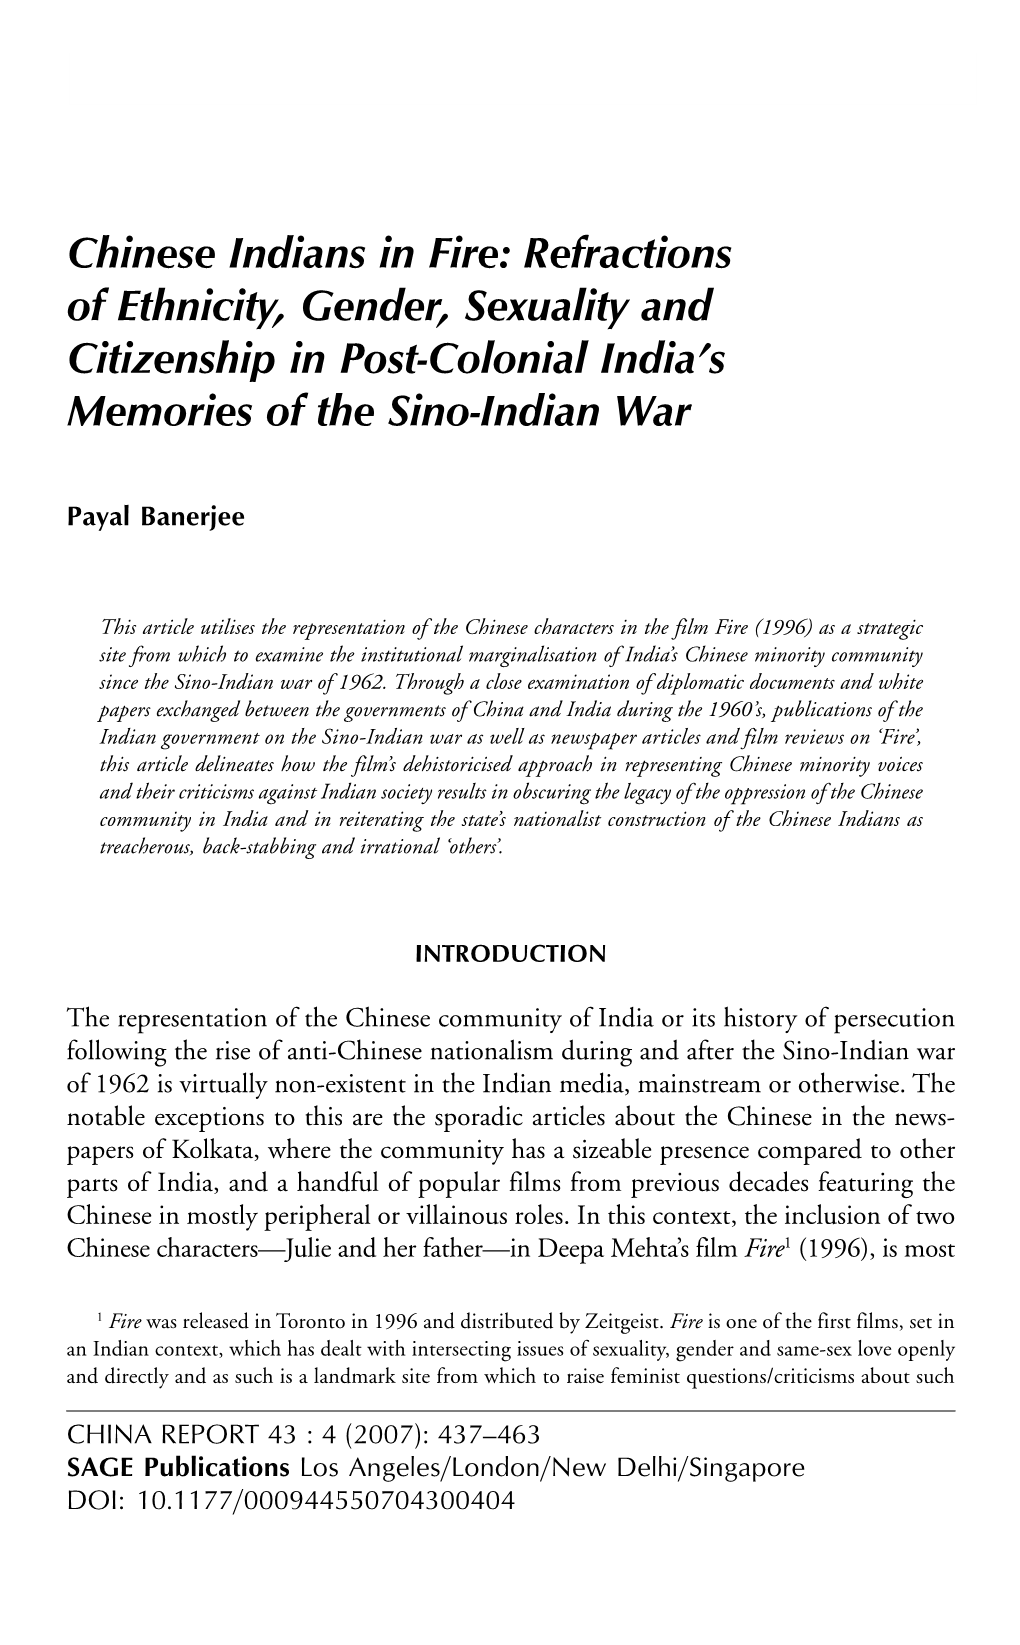 Chinese Indians in Fire: Refractions of Ethnicity, Gender, Sexuality and Citizenship in Post-Colonial India’S Memories of the Sino-Indian War